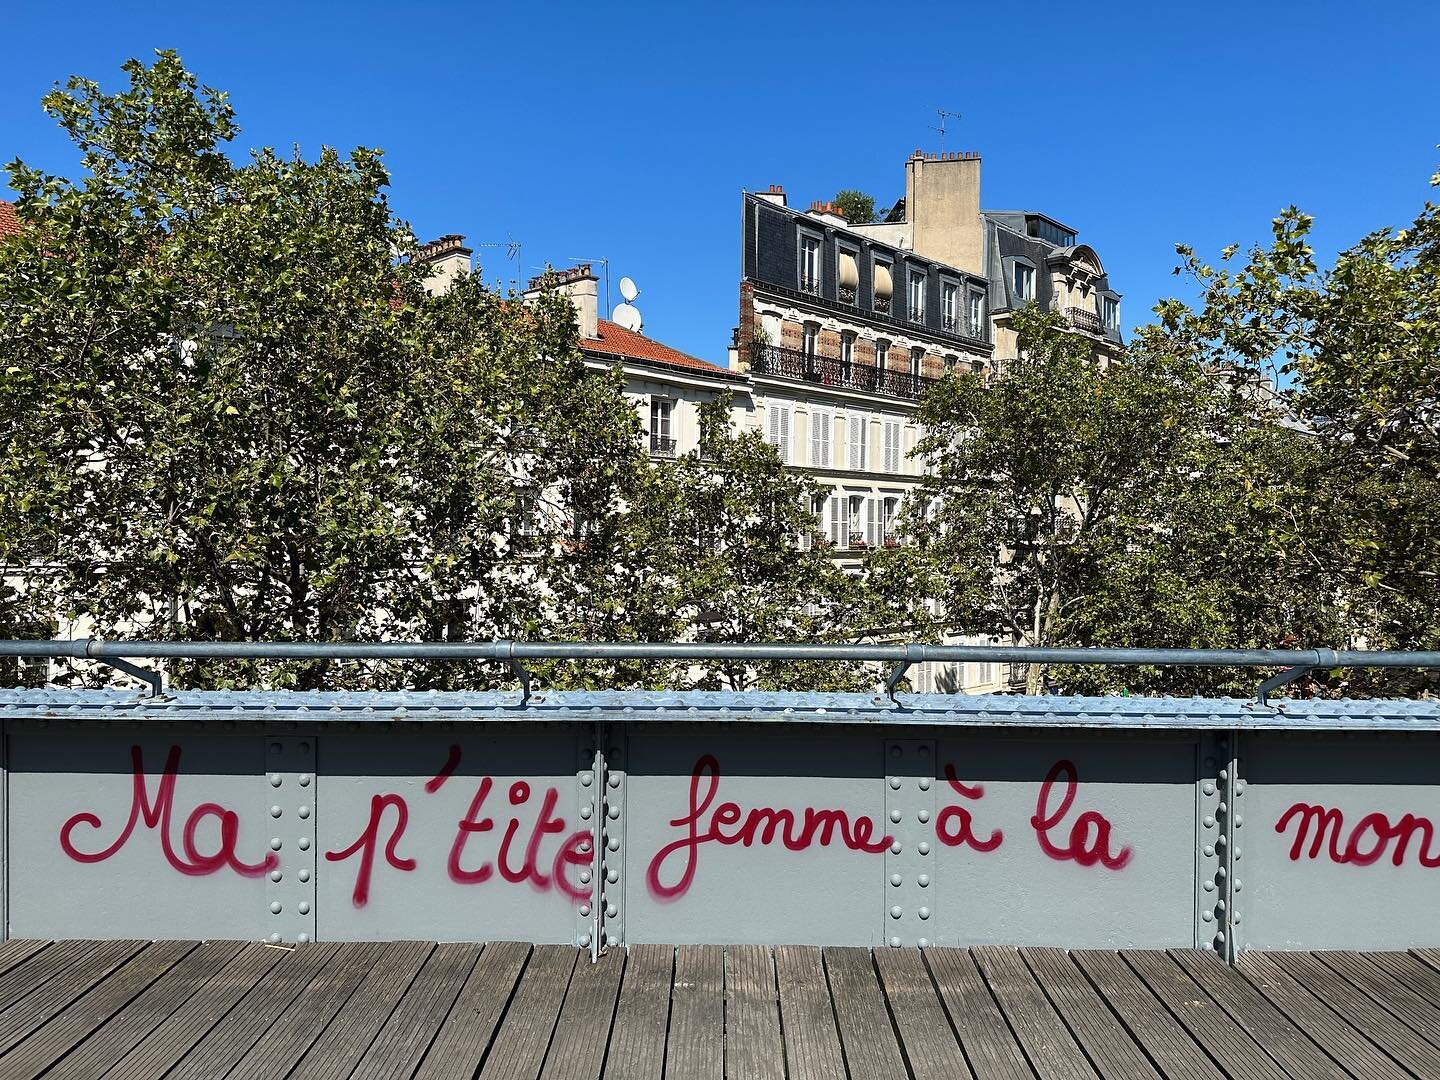 There&rsquo;s a gorgeous rail trail walk in Paris called the Promenade plant&eacute;e Ren&eacute;-Dumont (French for planted walkway). It&rsquo;s a 4.7 km elevated city park built on top of an obsolete railway in the 12th arrondissement. The perfect 